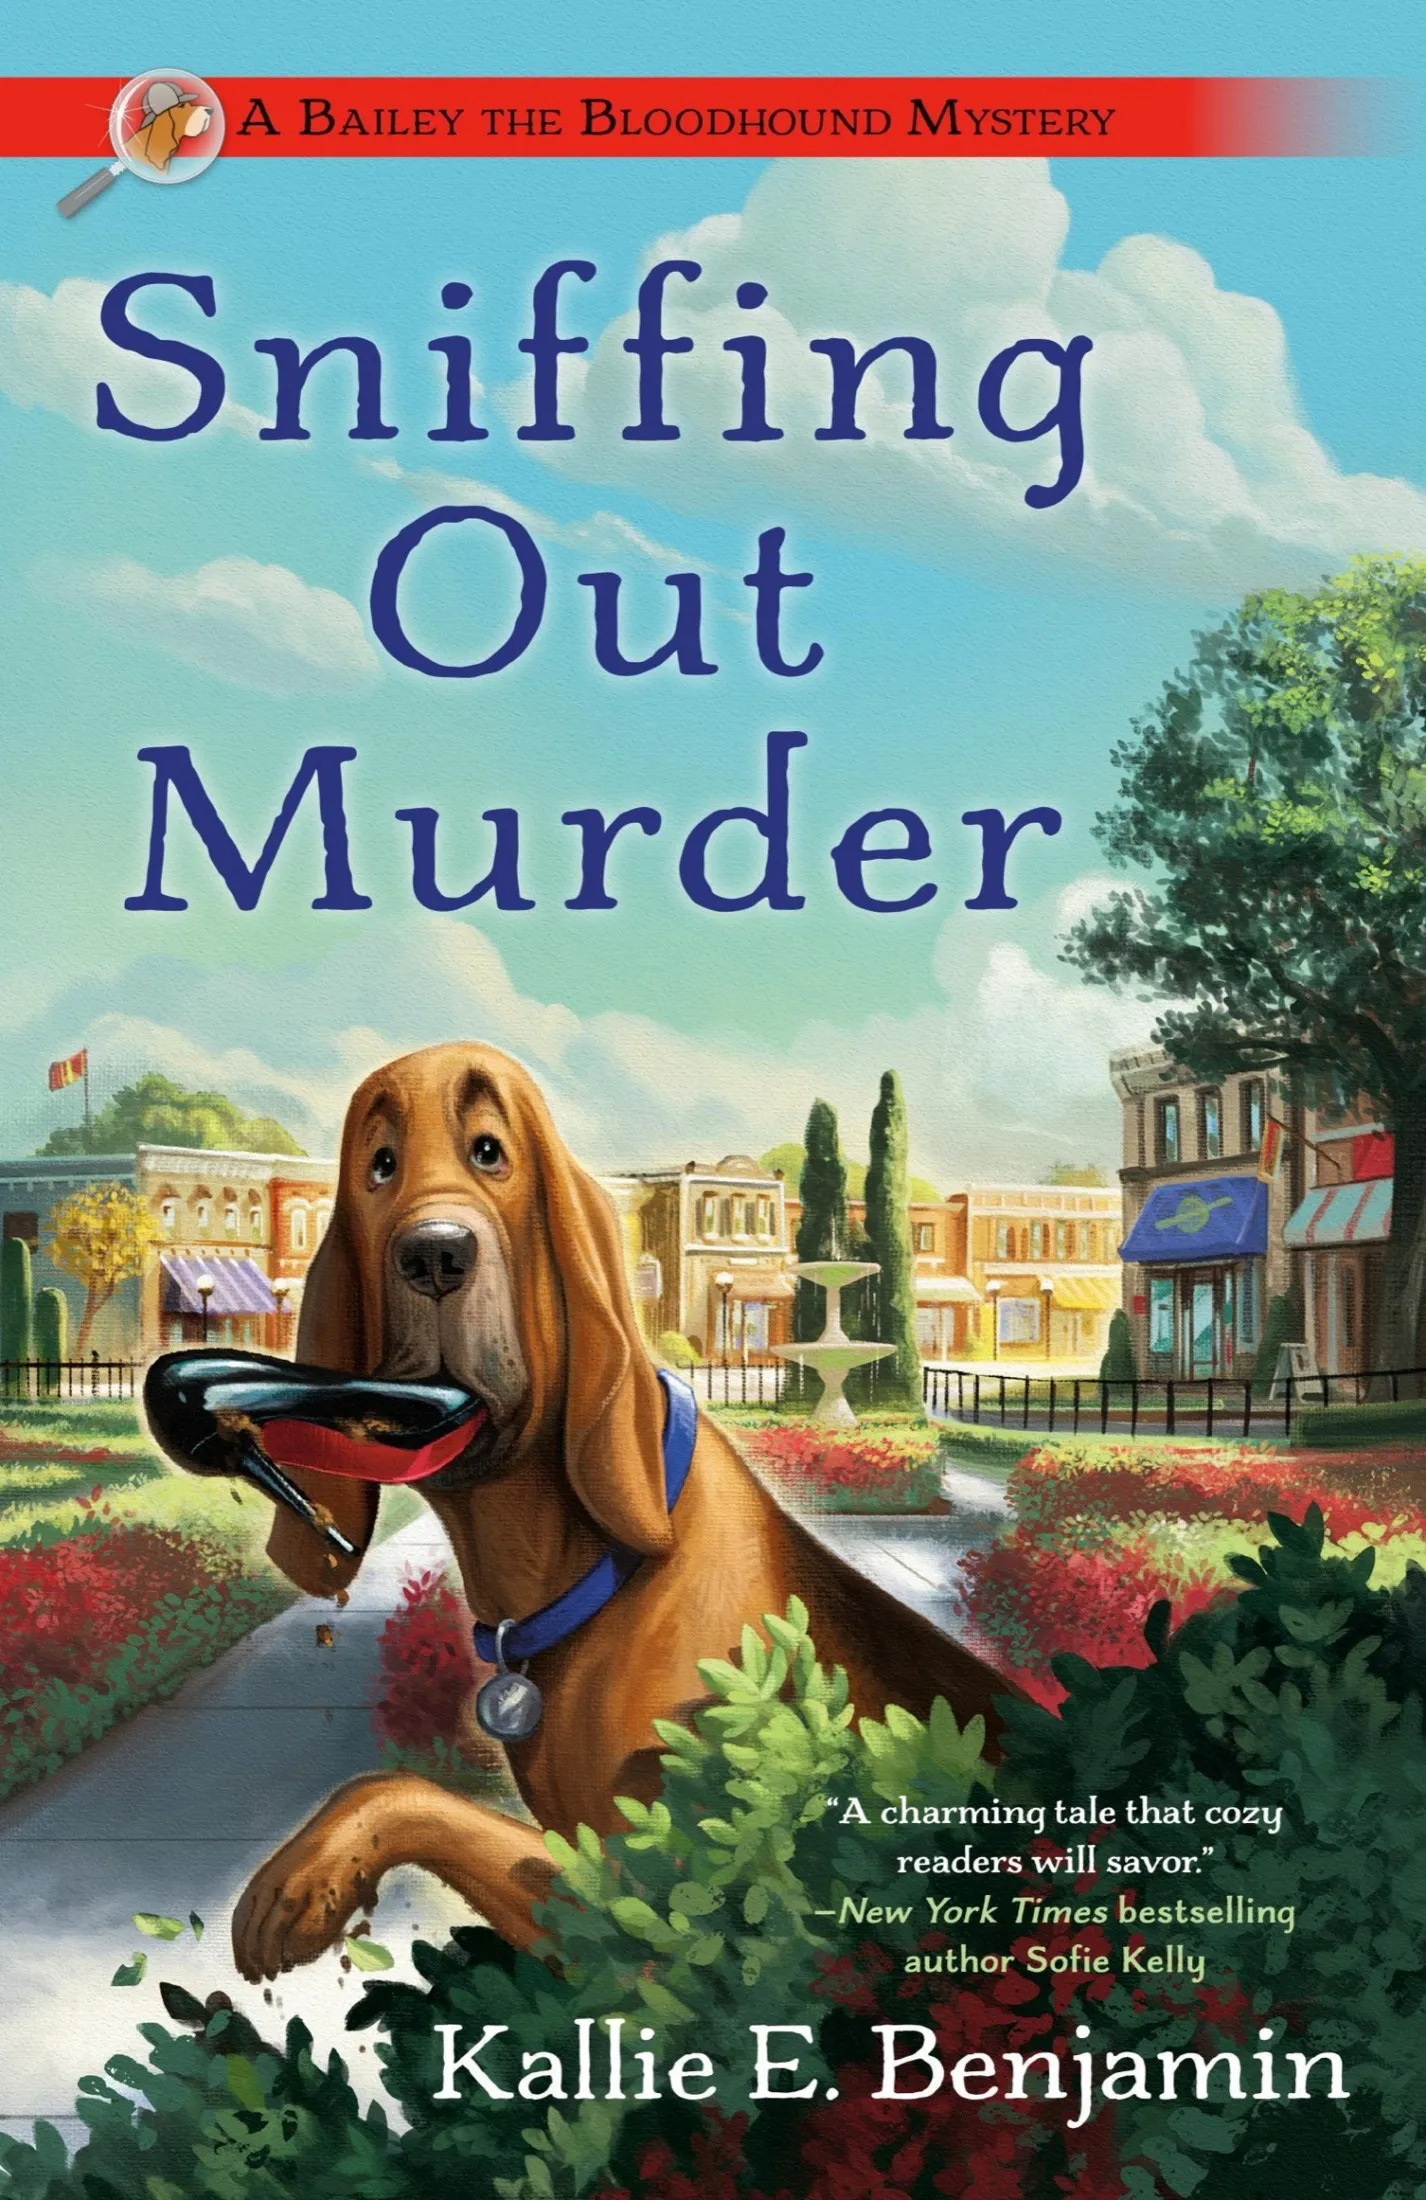 Sniffing Out Murder (A Bailey the Bloodhound Mystery #1)